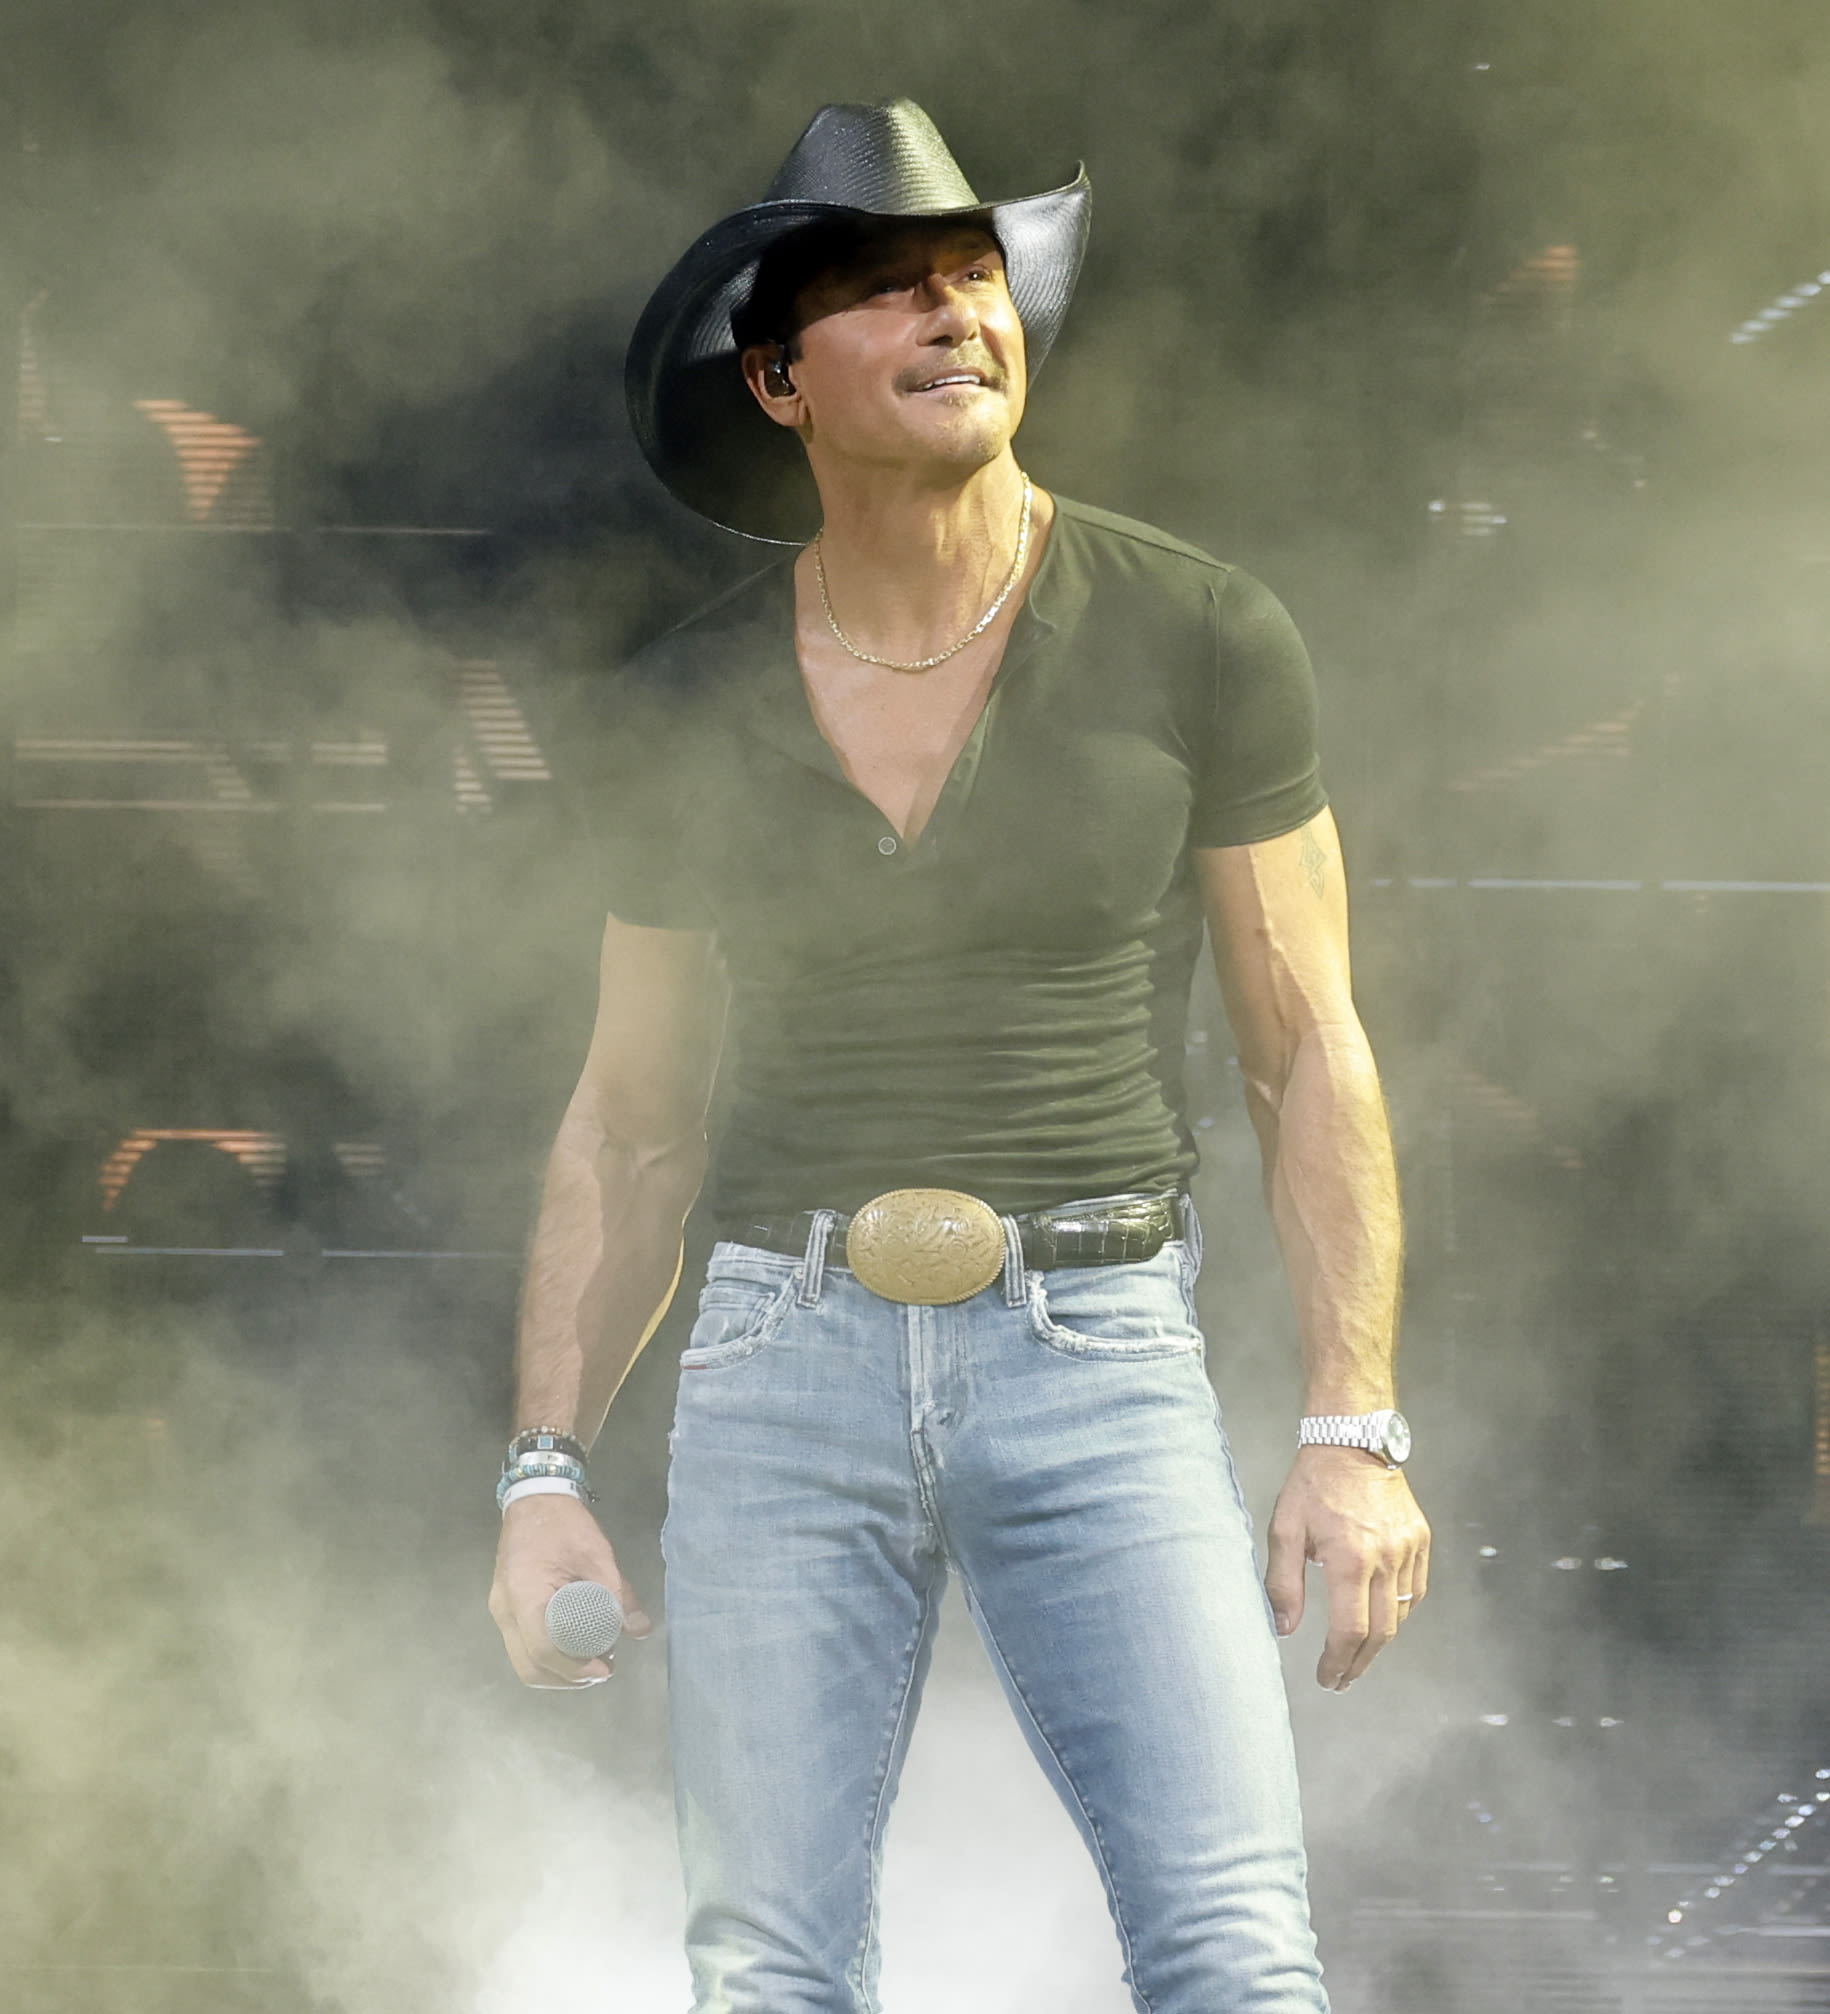 What We Know About Tim McGraw’s Untitled Bull Rider Drama Series at Netflix